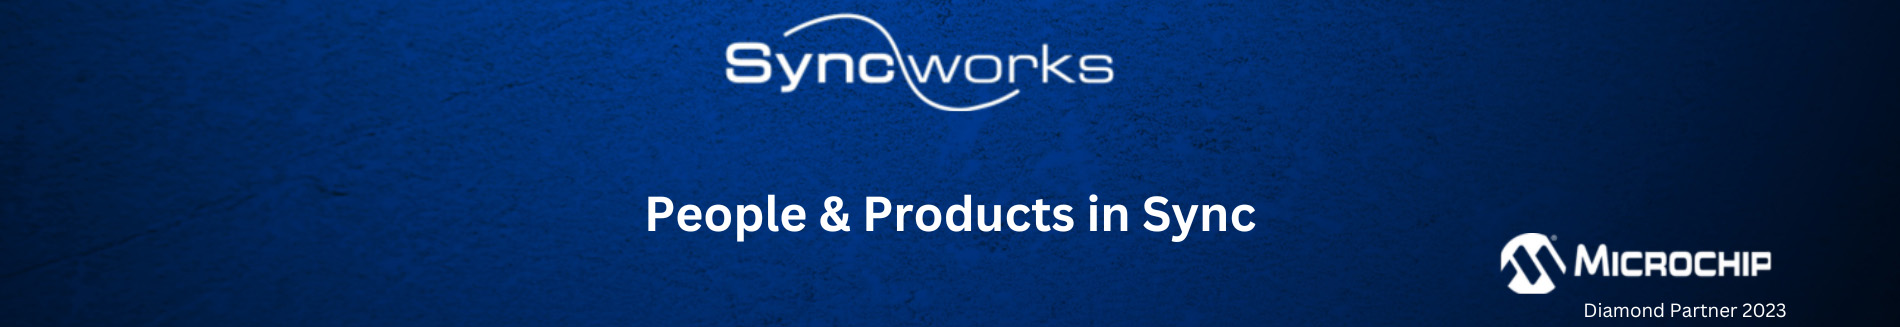 Syncworks and Microchip logos on blue background